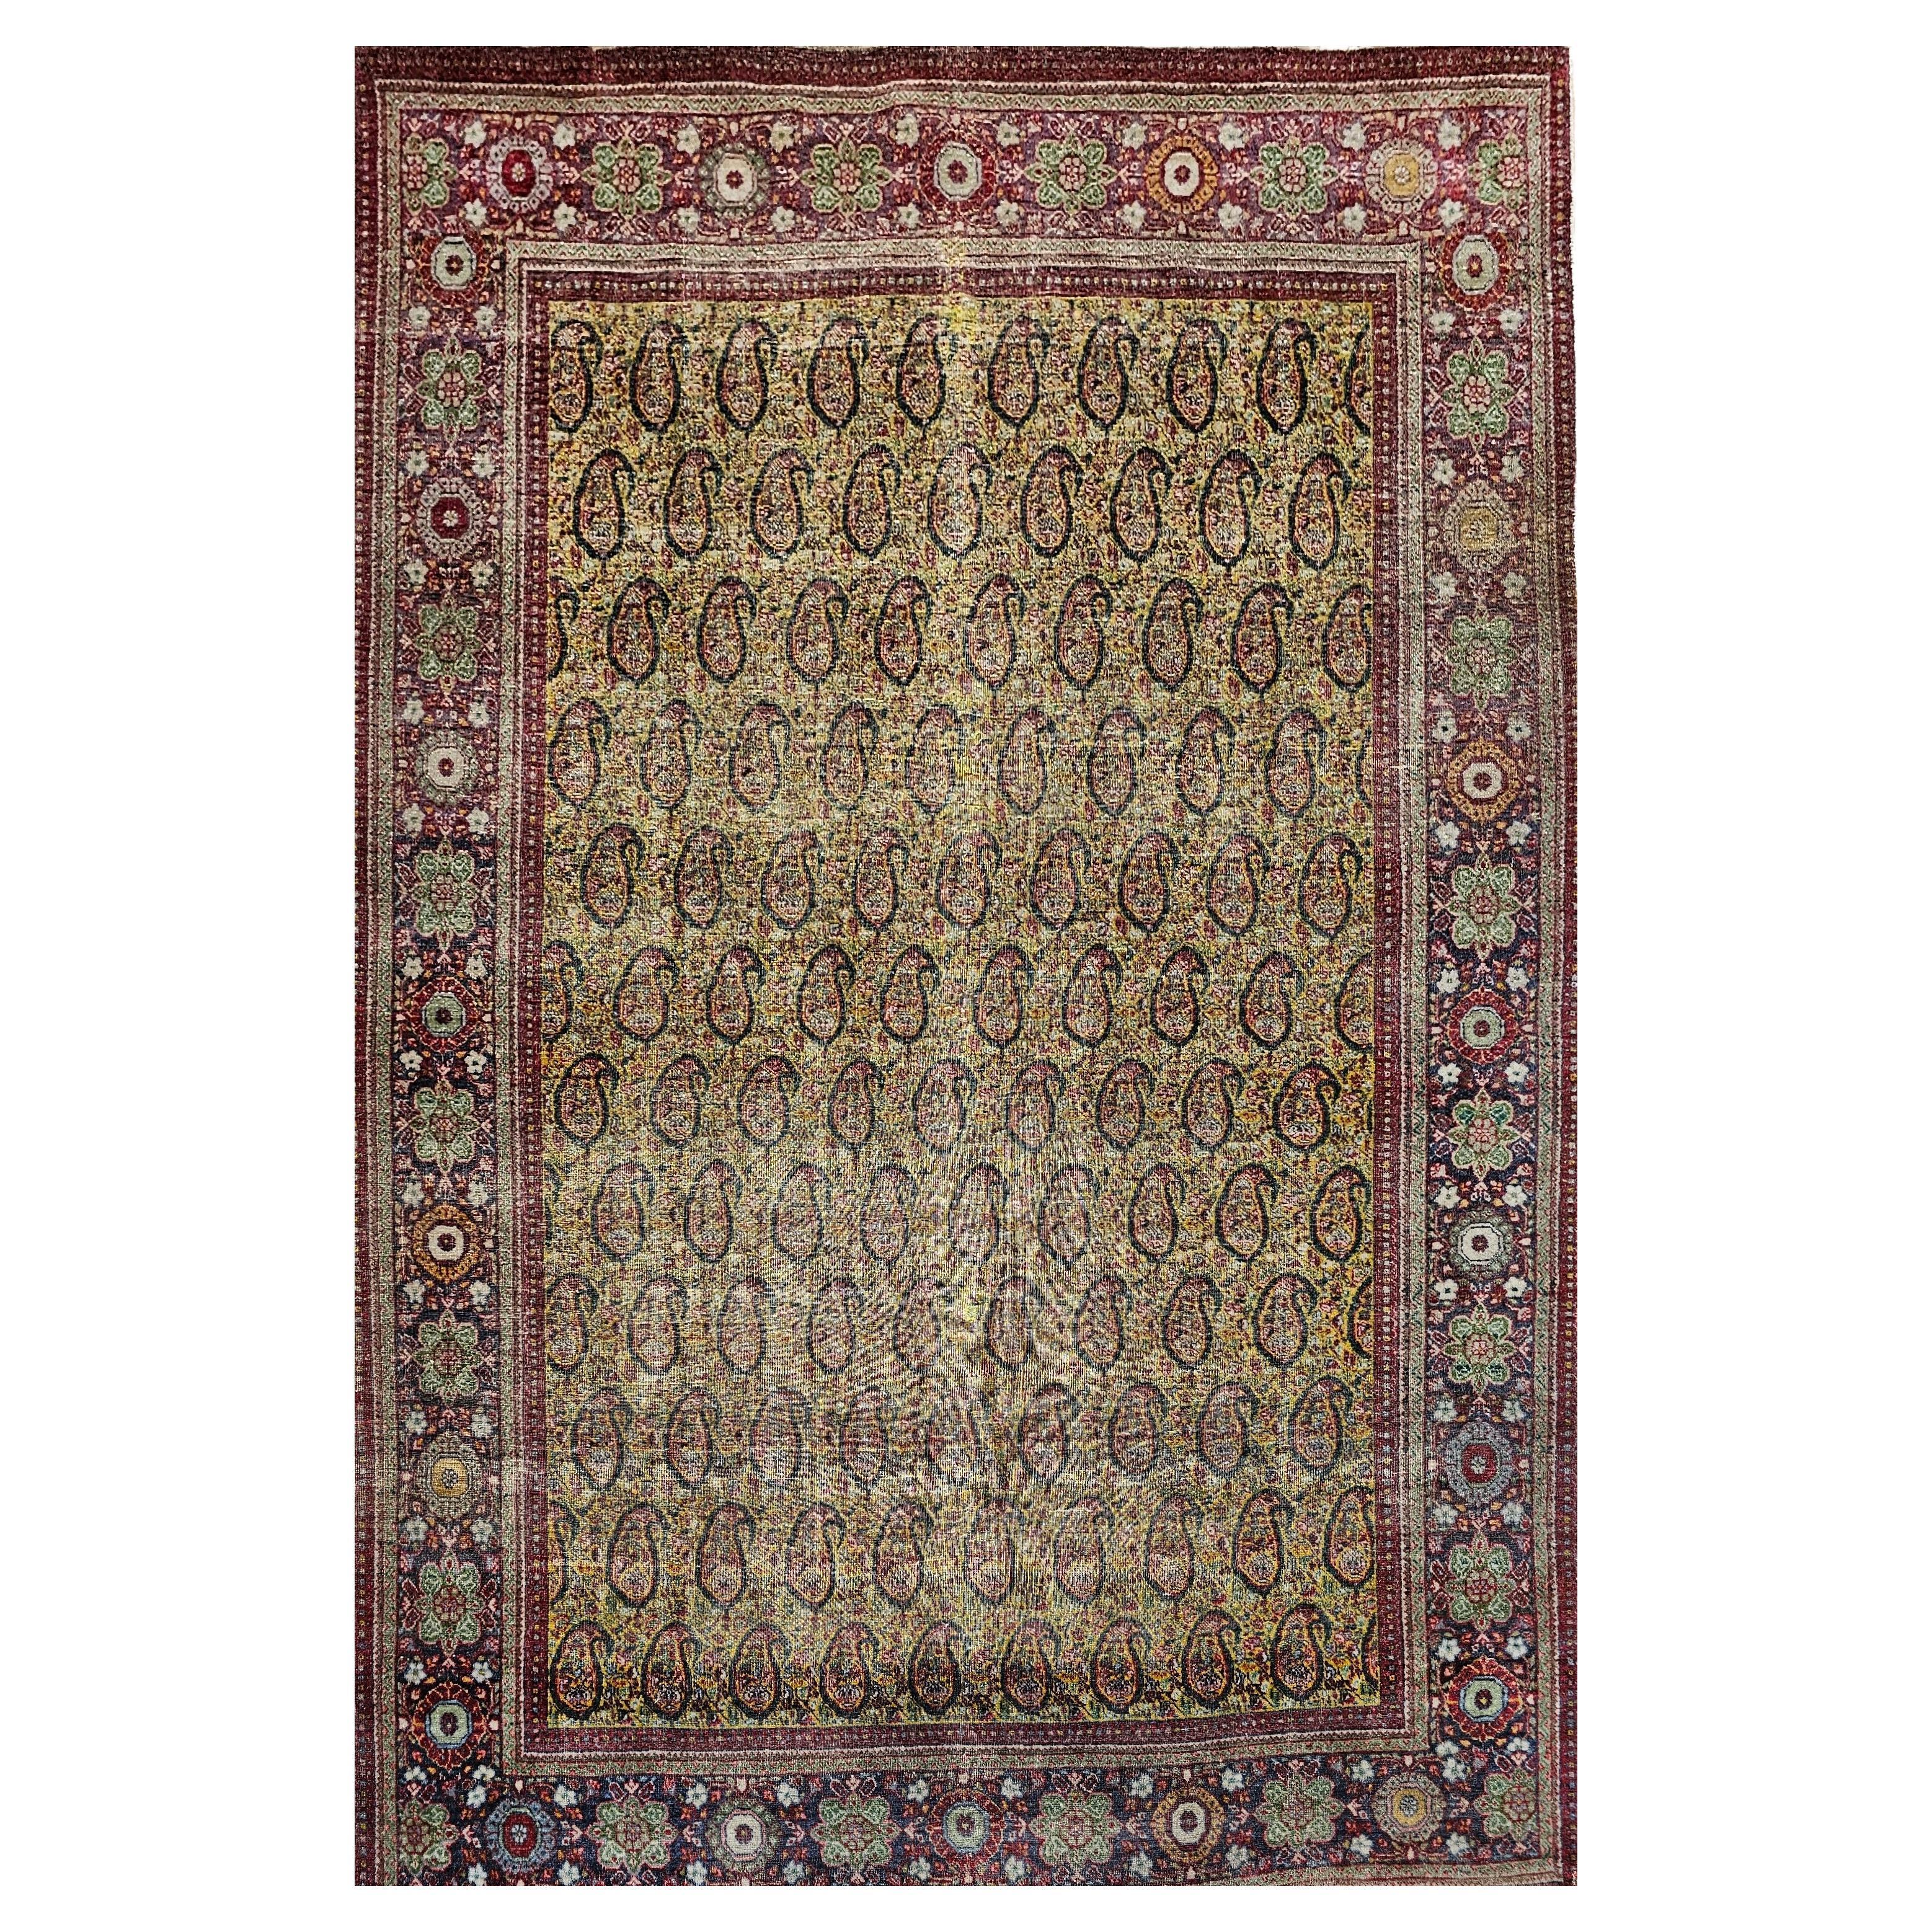 Vintage Persian Tabriz in Allover Paisley Pattern in Pale Green, Yellow, Gray